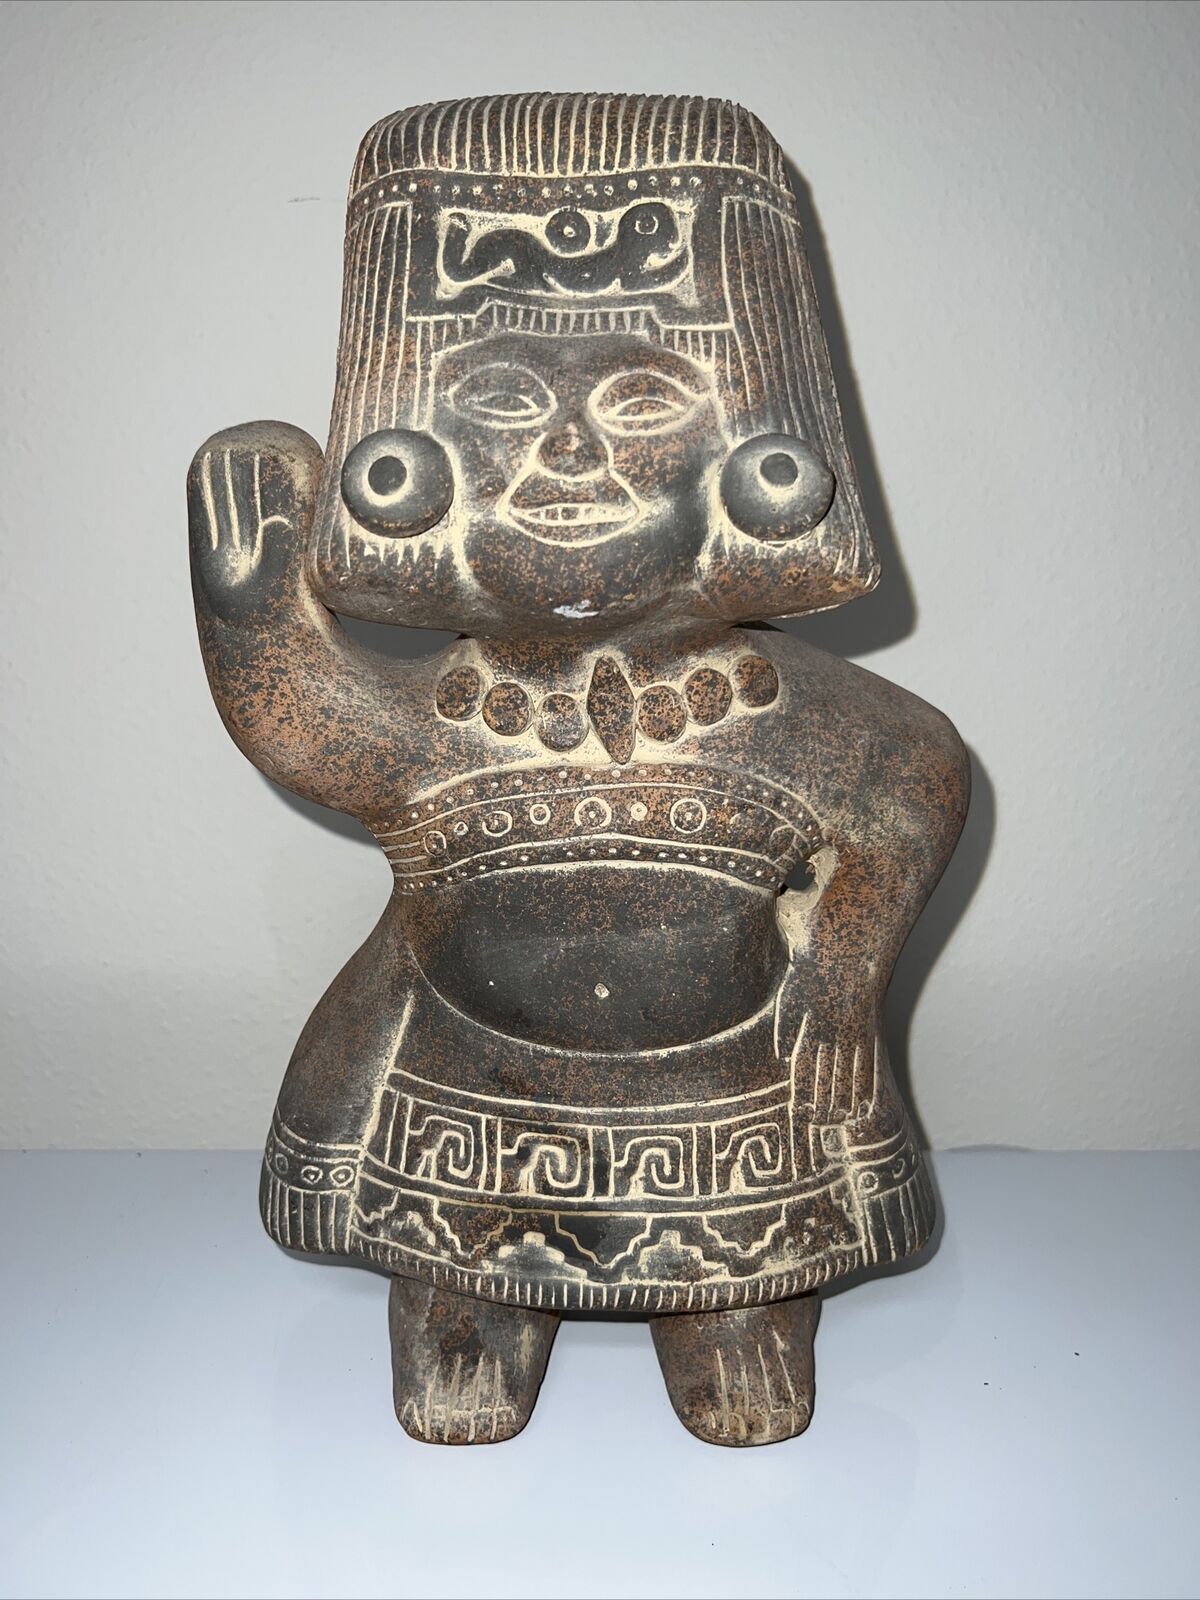 Vintage Clay Figurine of Mexican Fertility Goddess